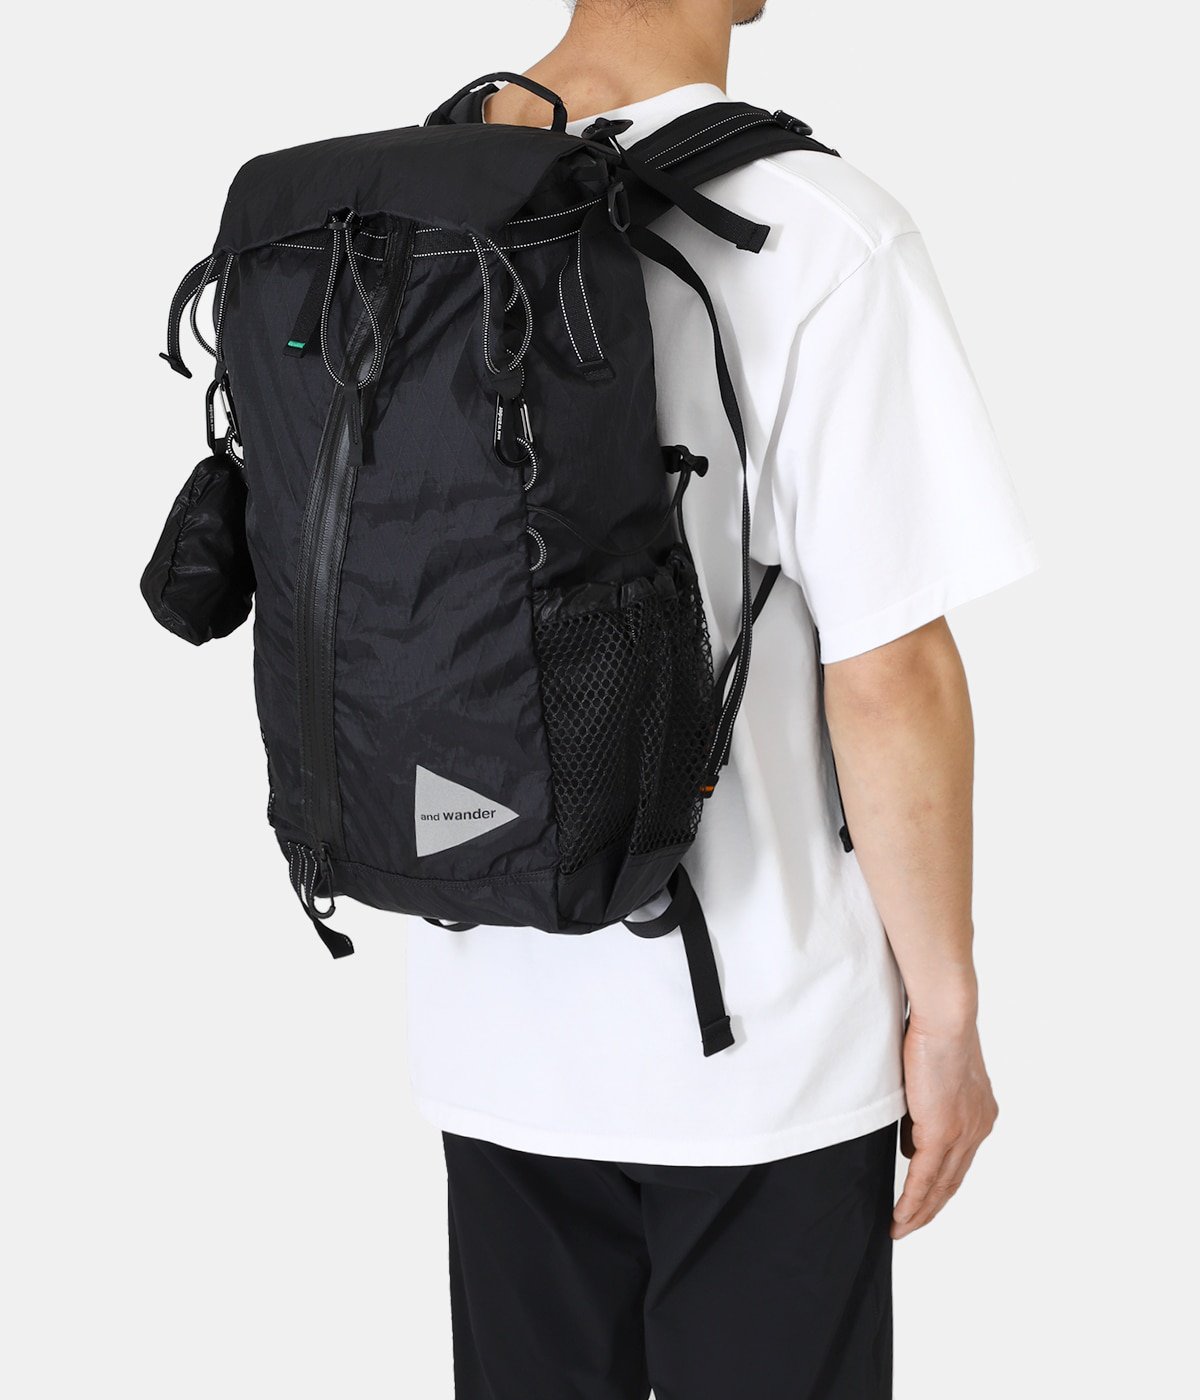 X-Pac 30L backpack | and wander(アンドワンダー) / バッグ バック 